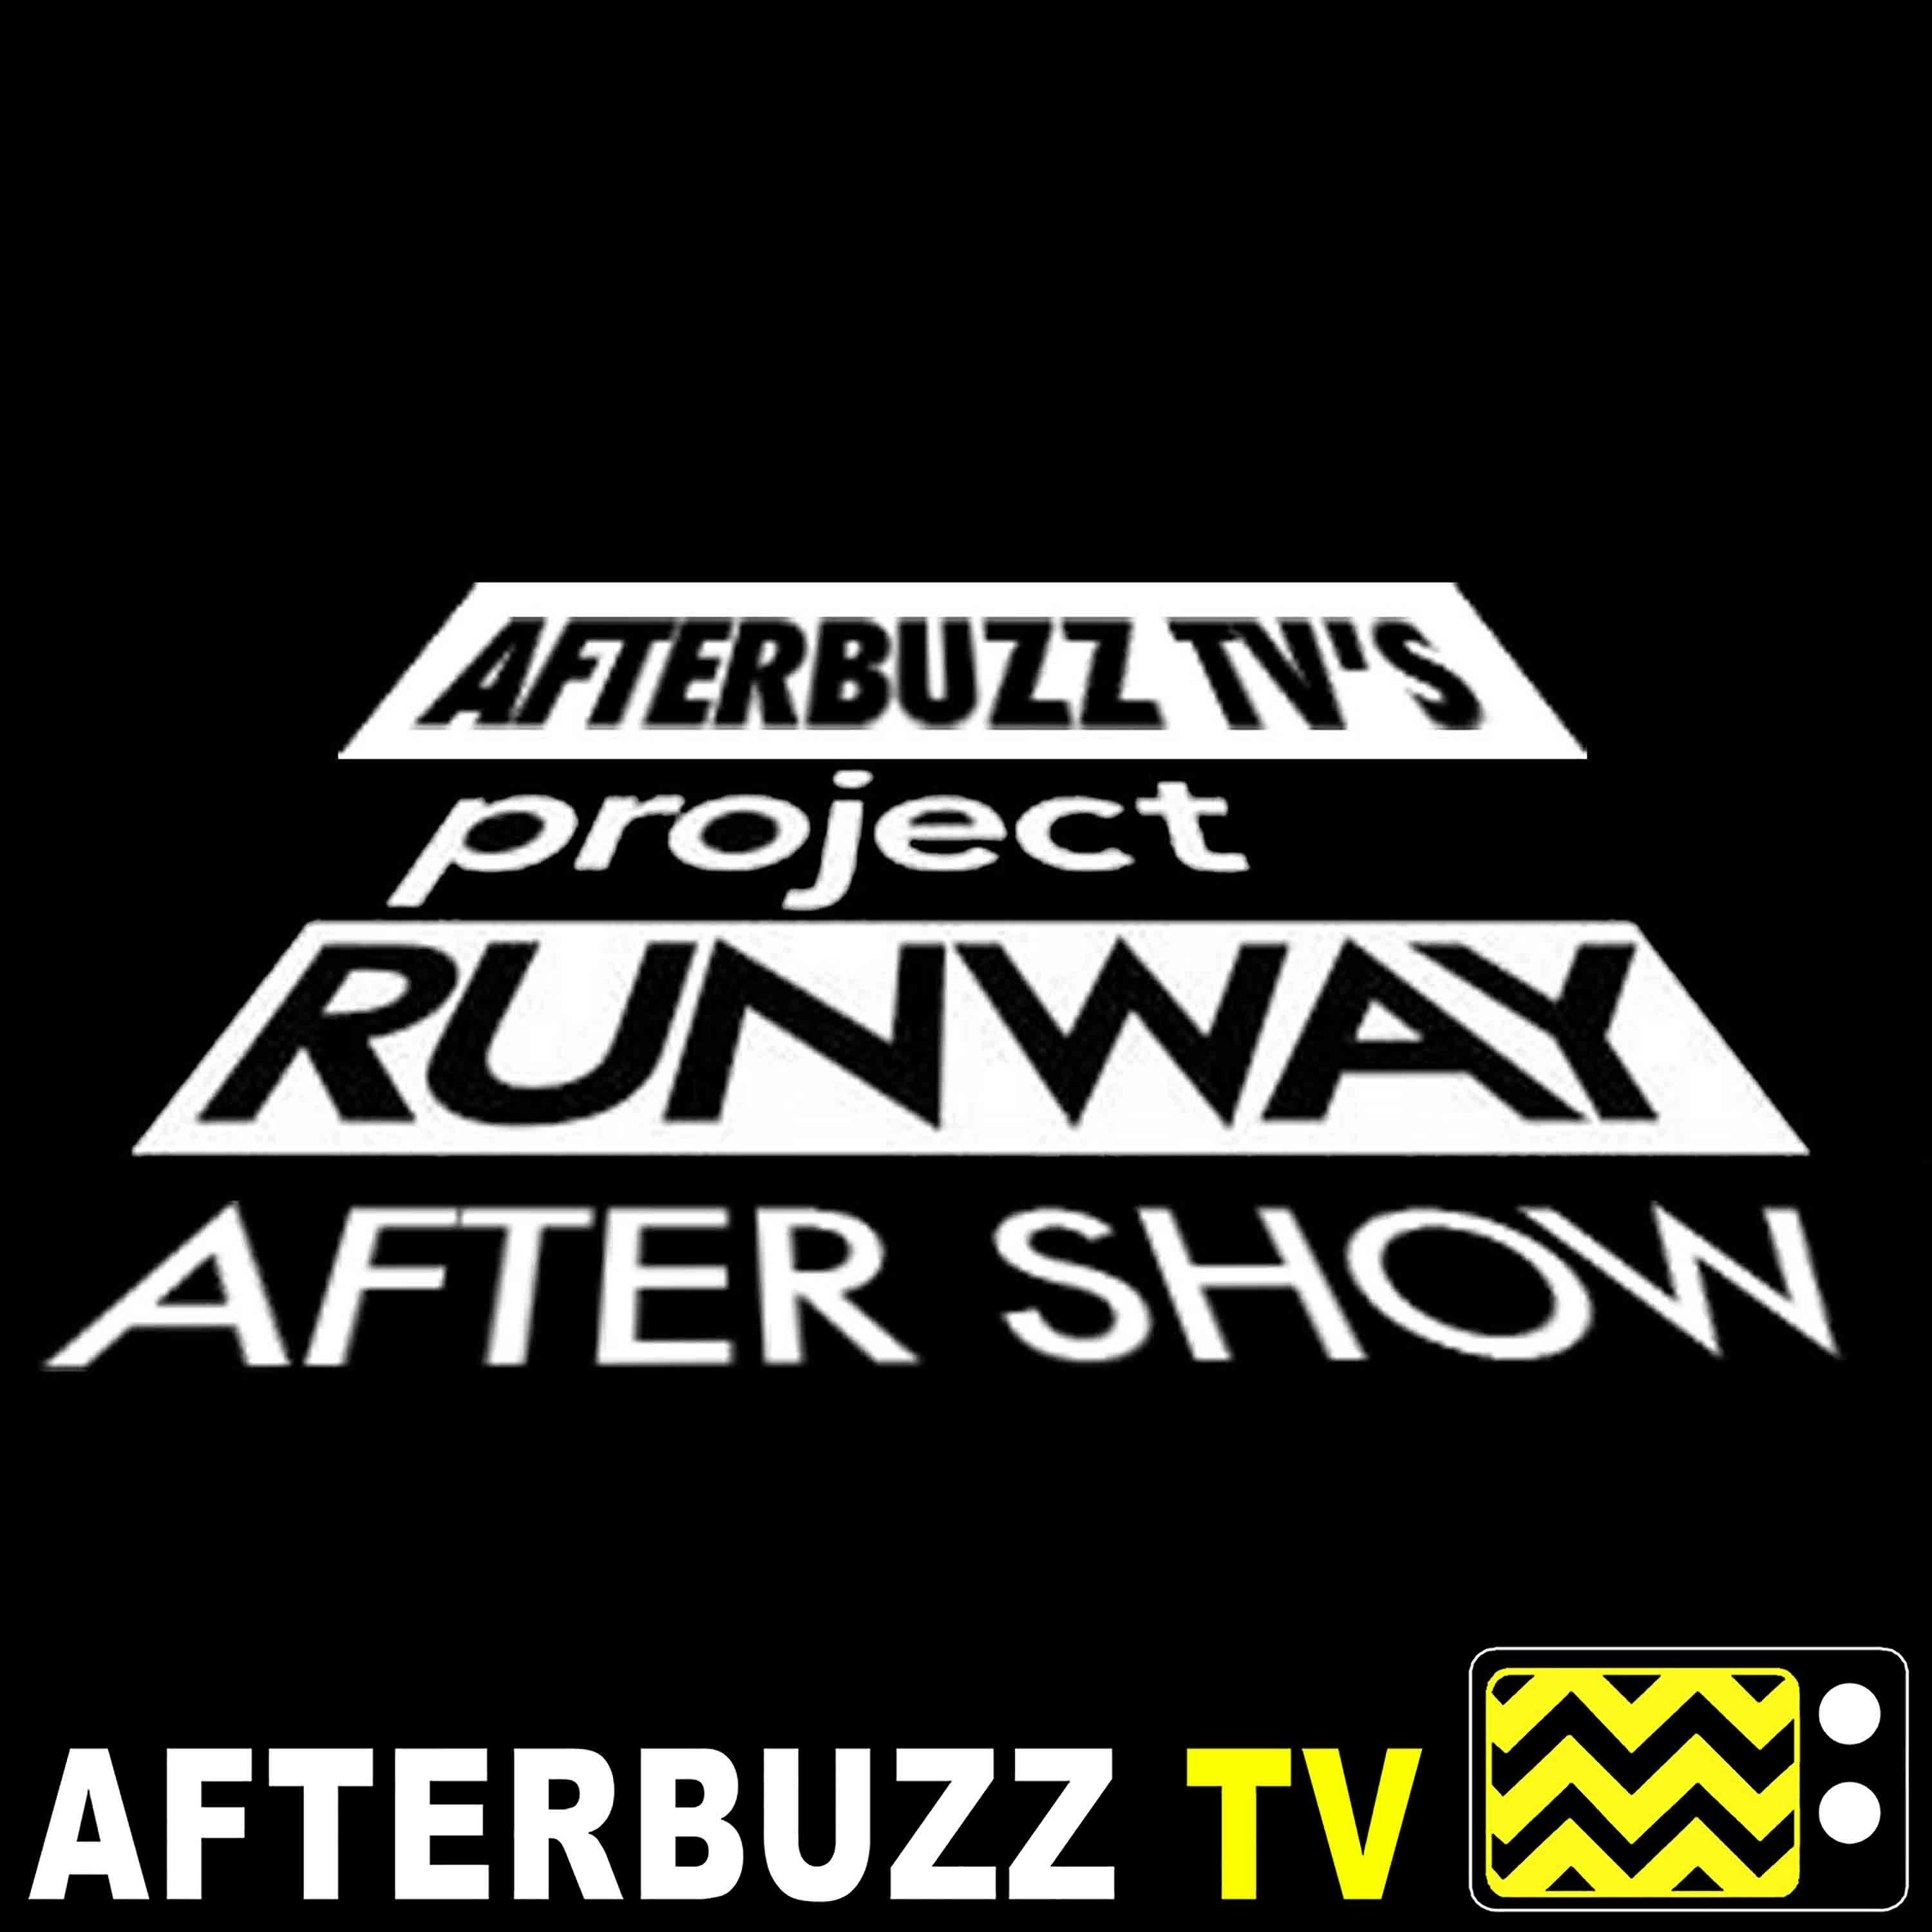 Project Runway All Stars S:6 | Rock Your Face Off E:10 | AfterBuzz TV AfterShow